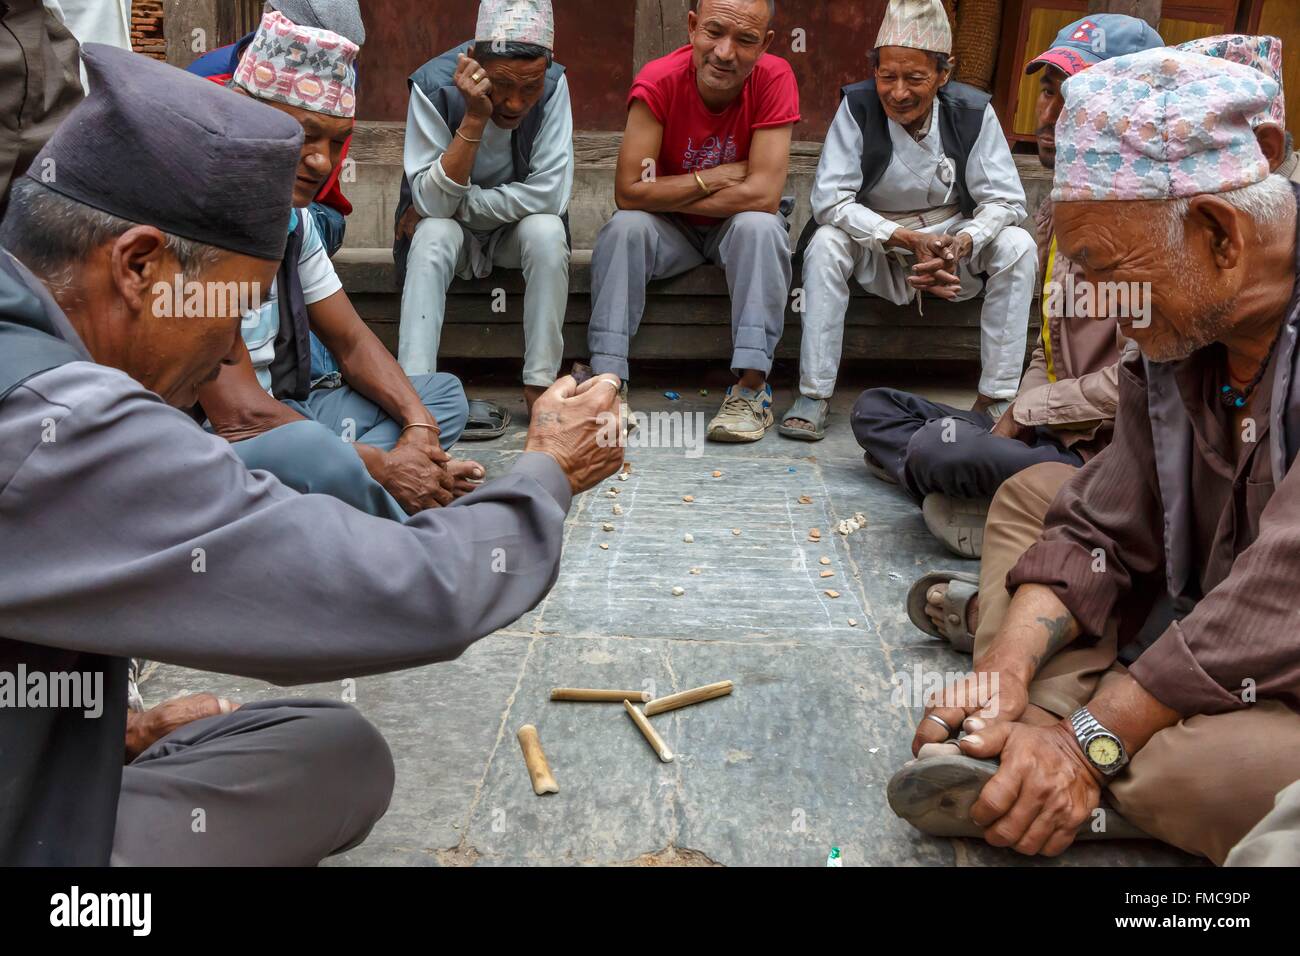 Nepal, Bagmati zone, Bhaktapur, men playing a game with pieces of bamboo Stock Photo